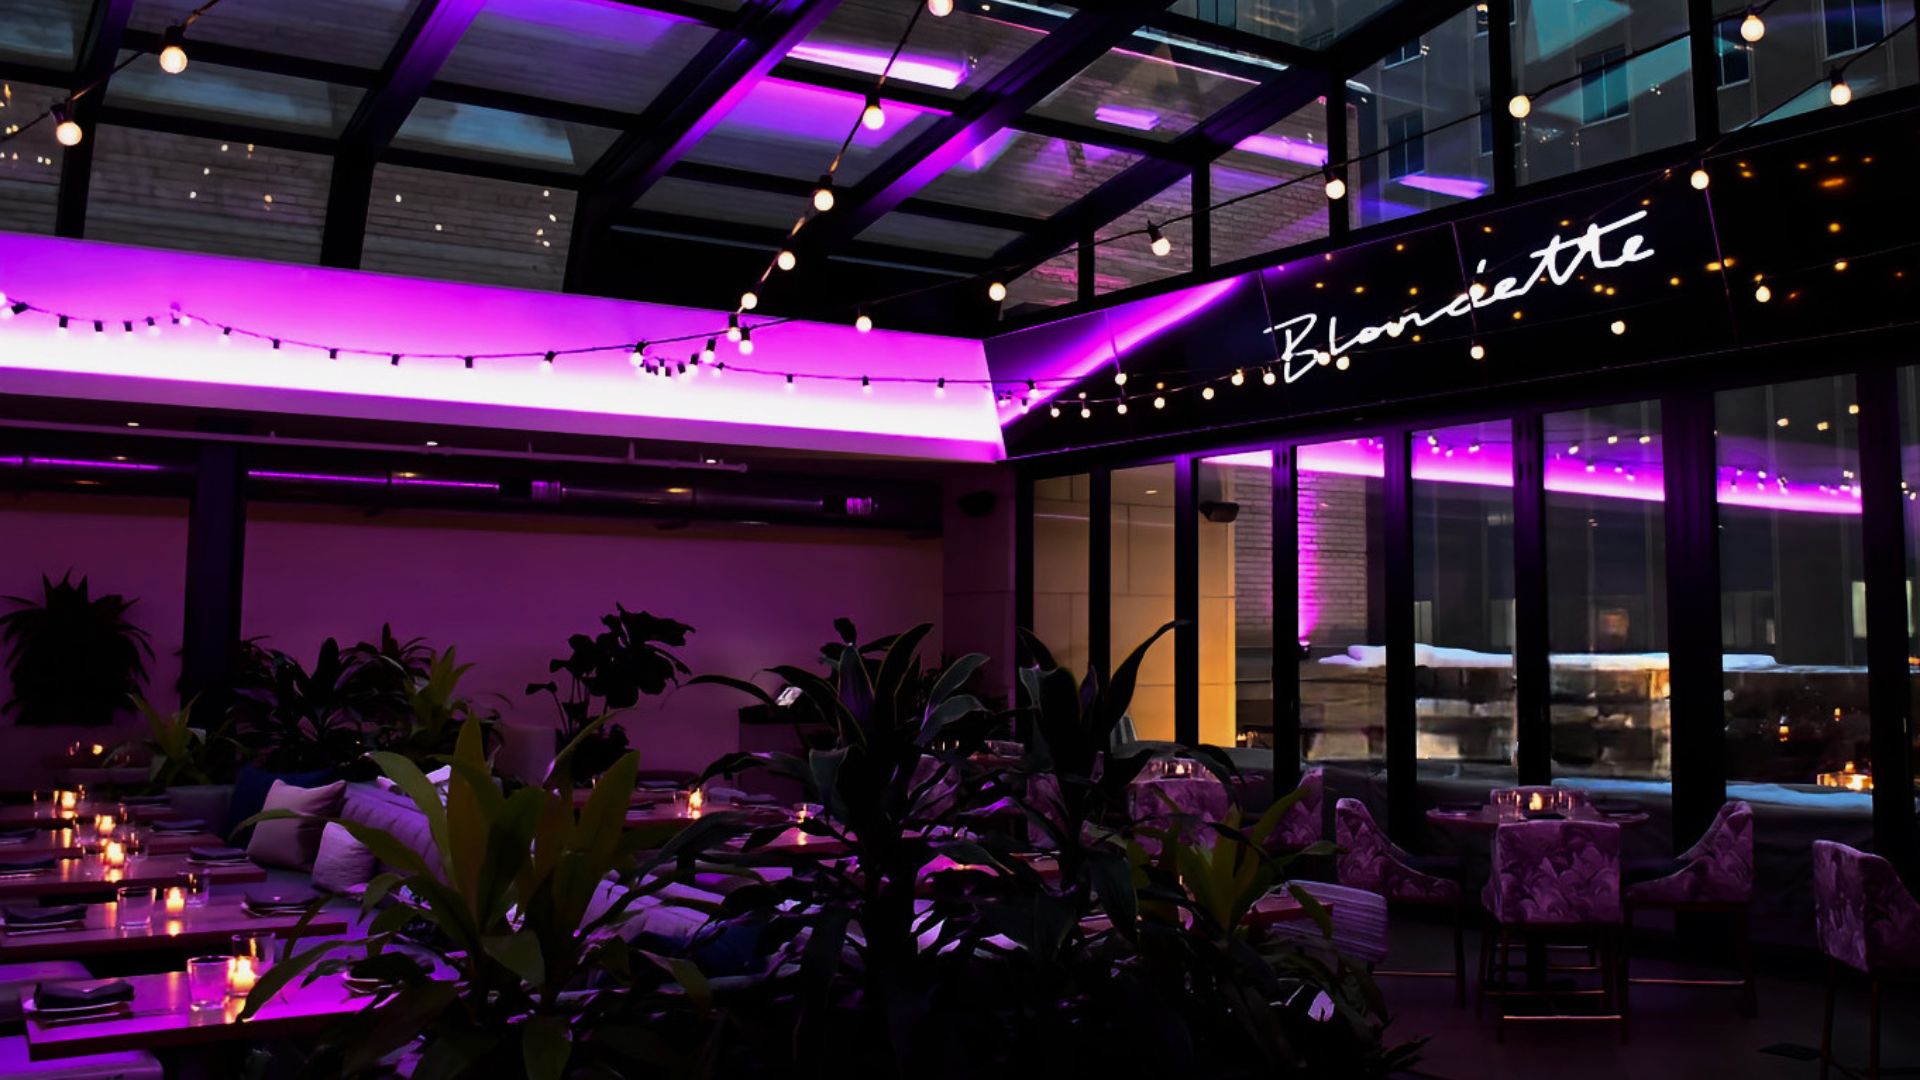 A Room With Purple Lighting And Plants